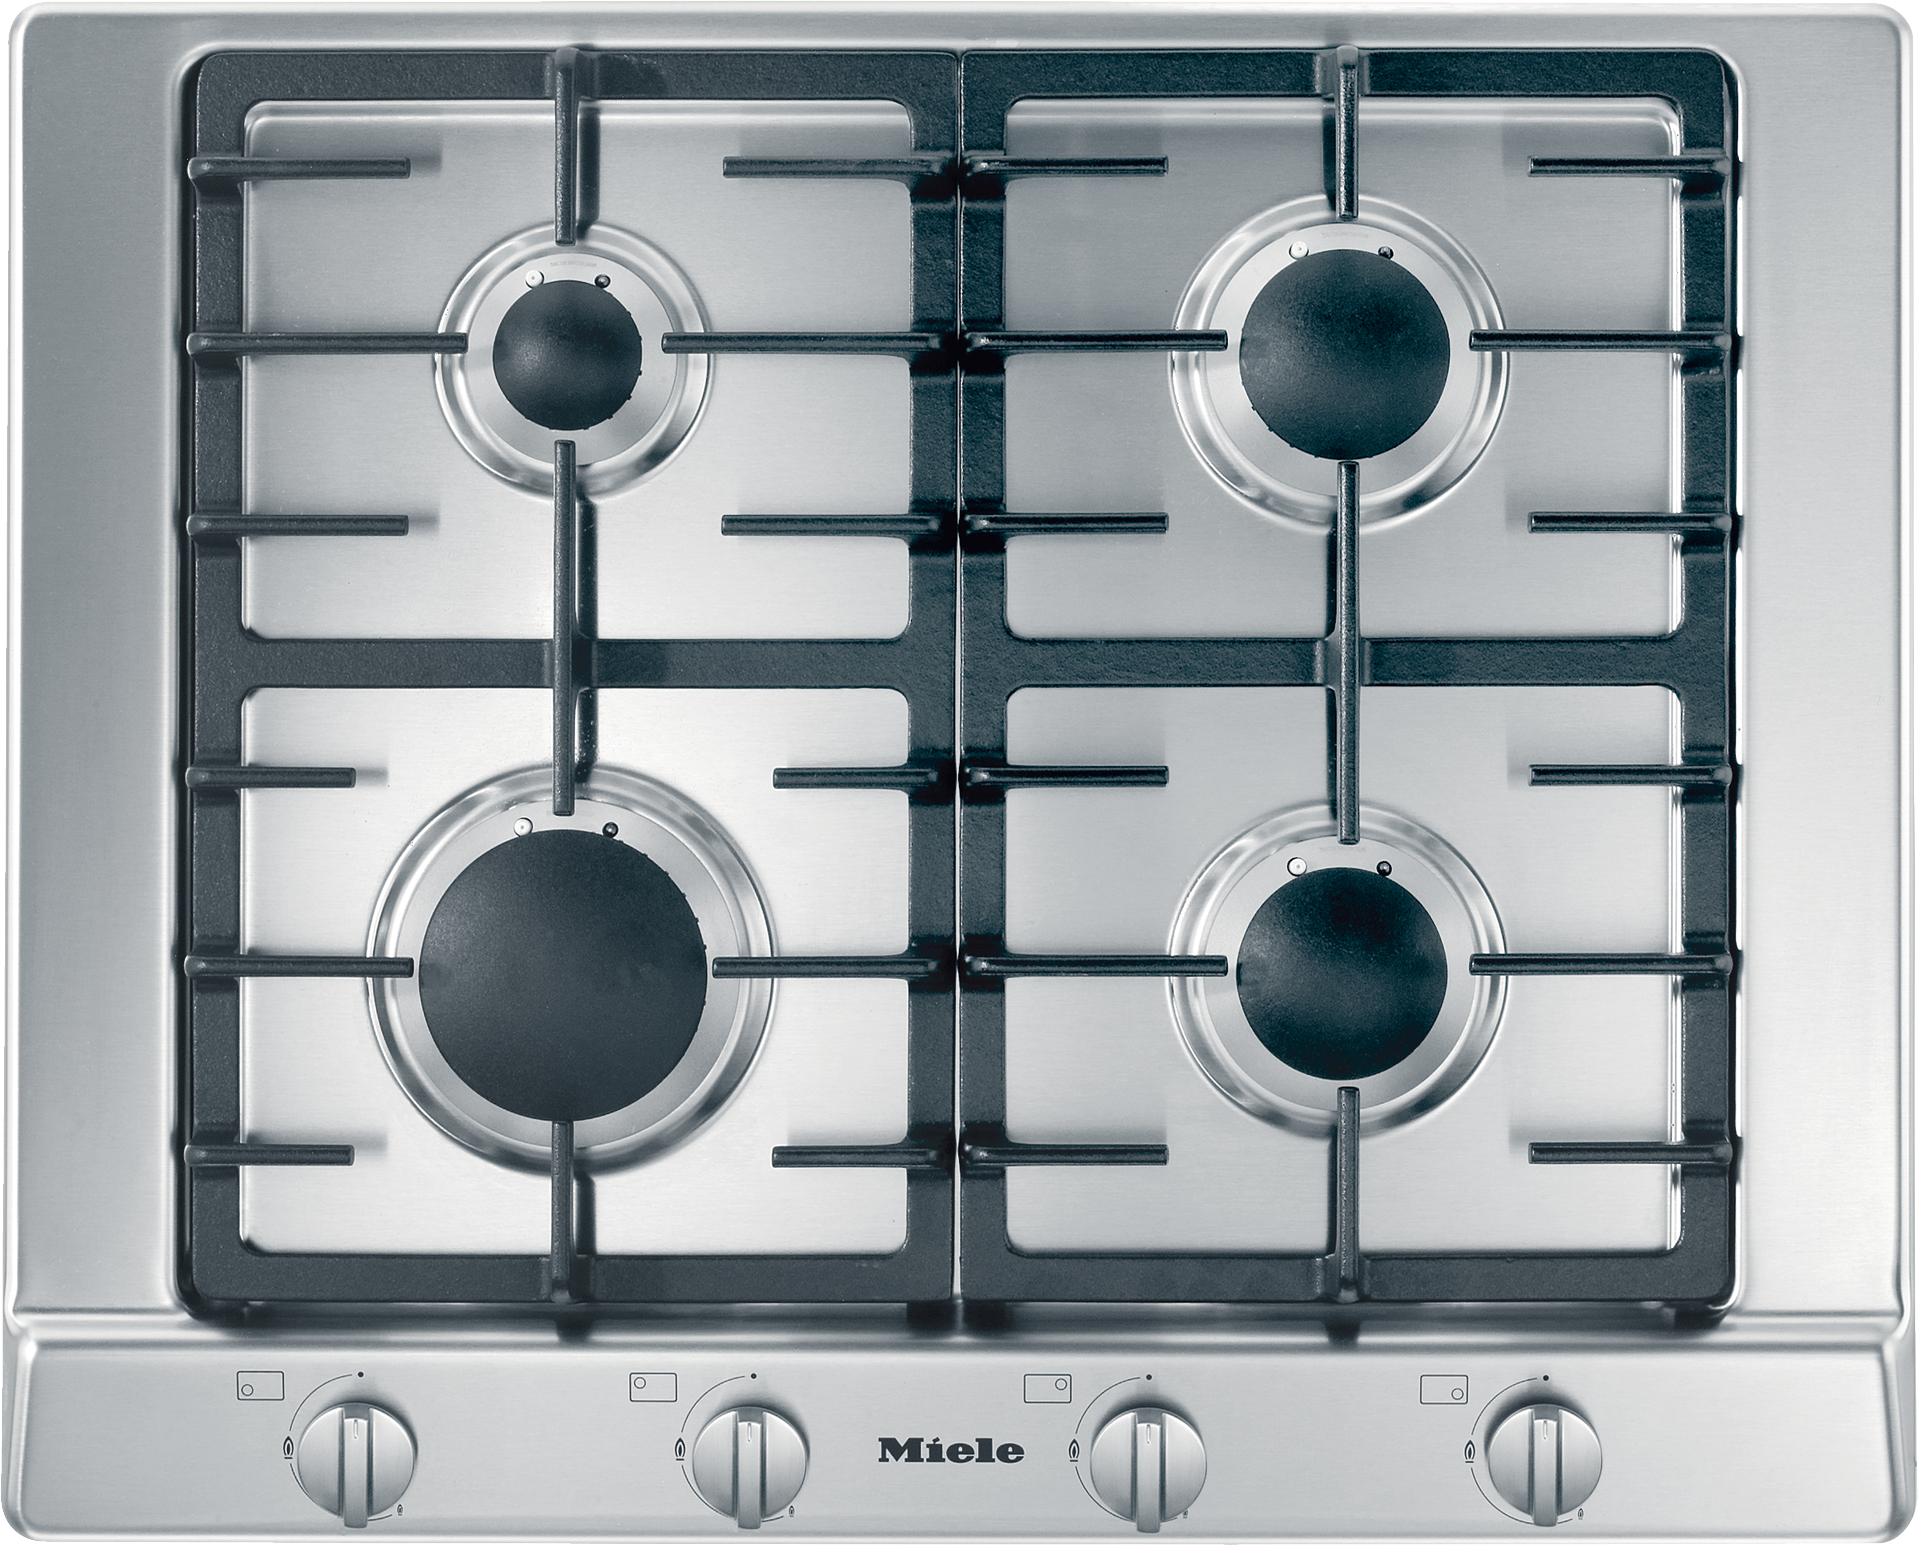 Hobs - KM 2010 Stainless steel - 1